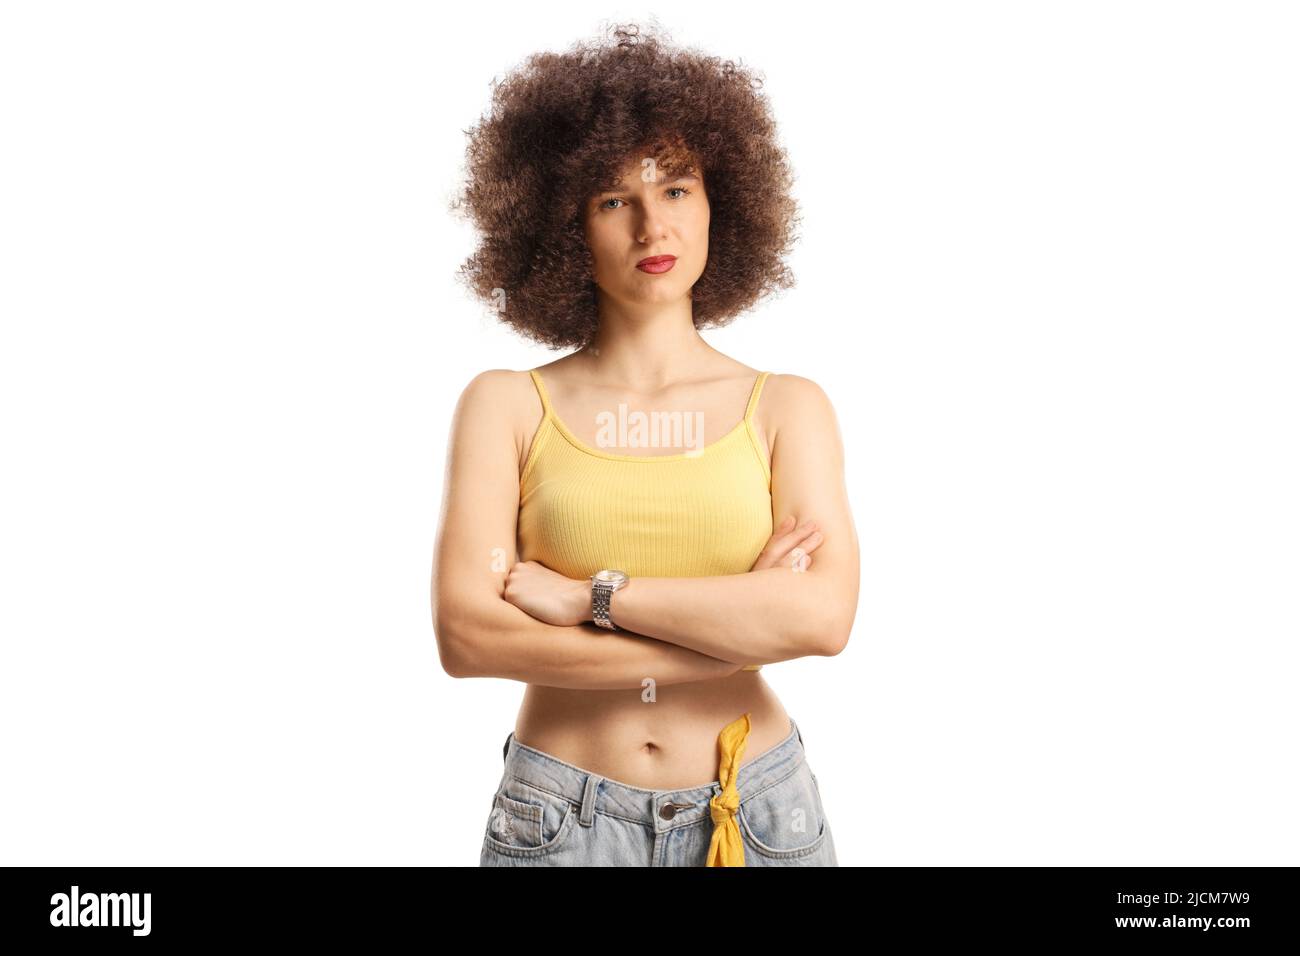 Serious young caucasian woman with afro hairstyle isolated on white background Stock Photo